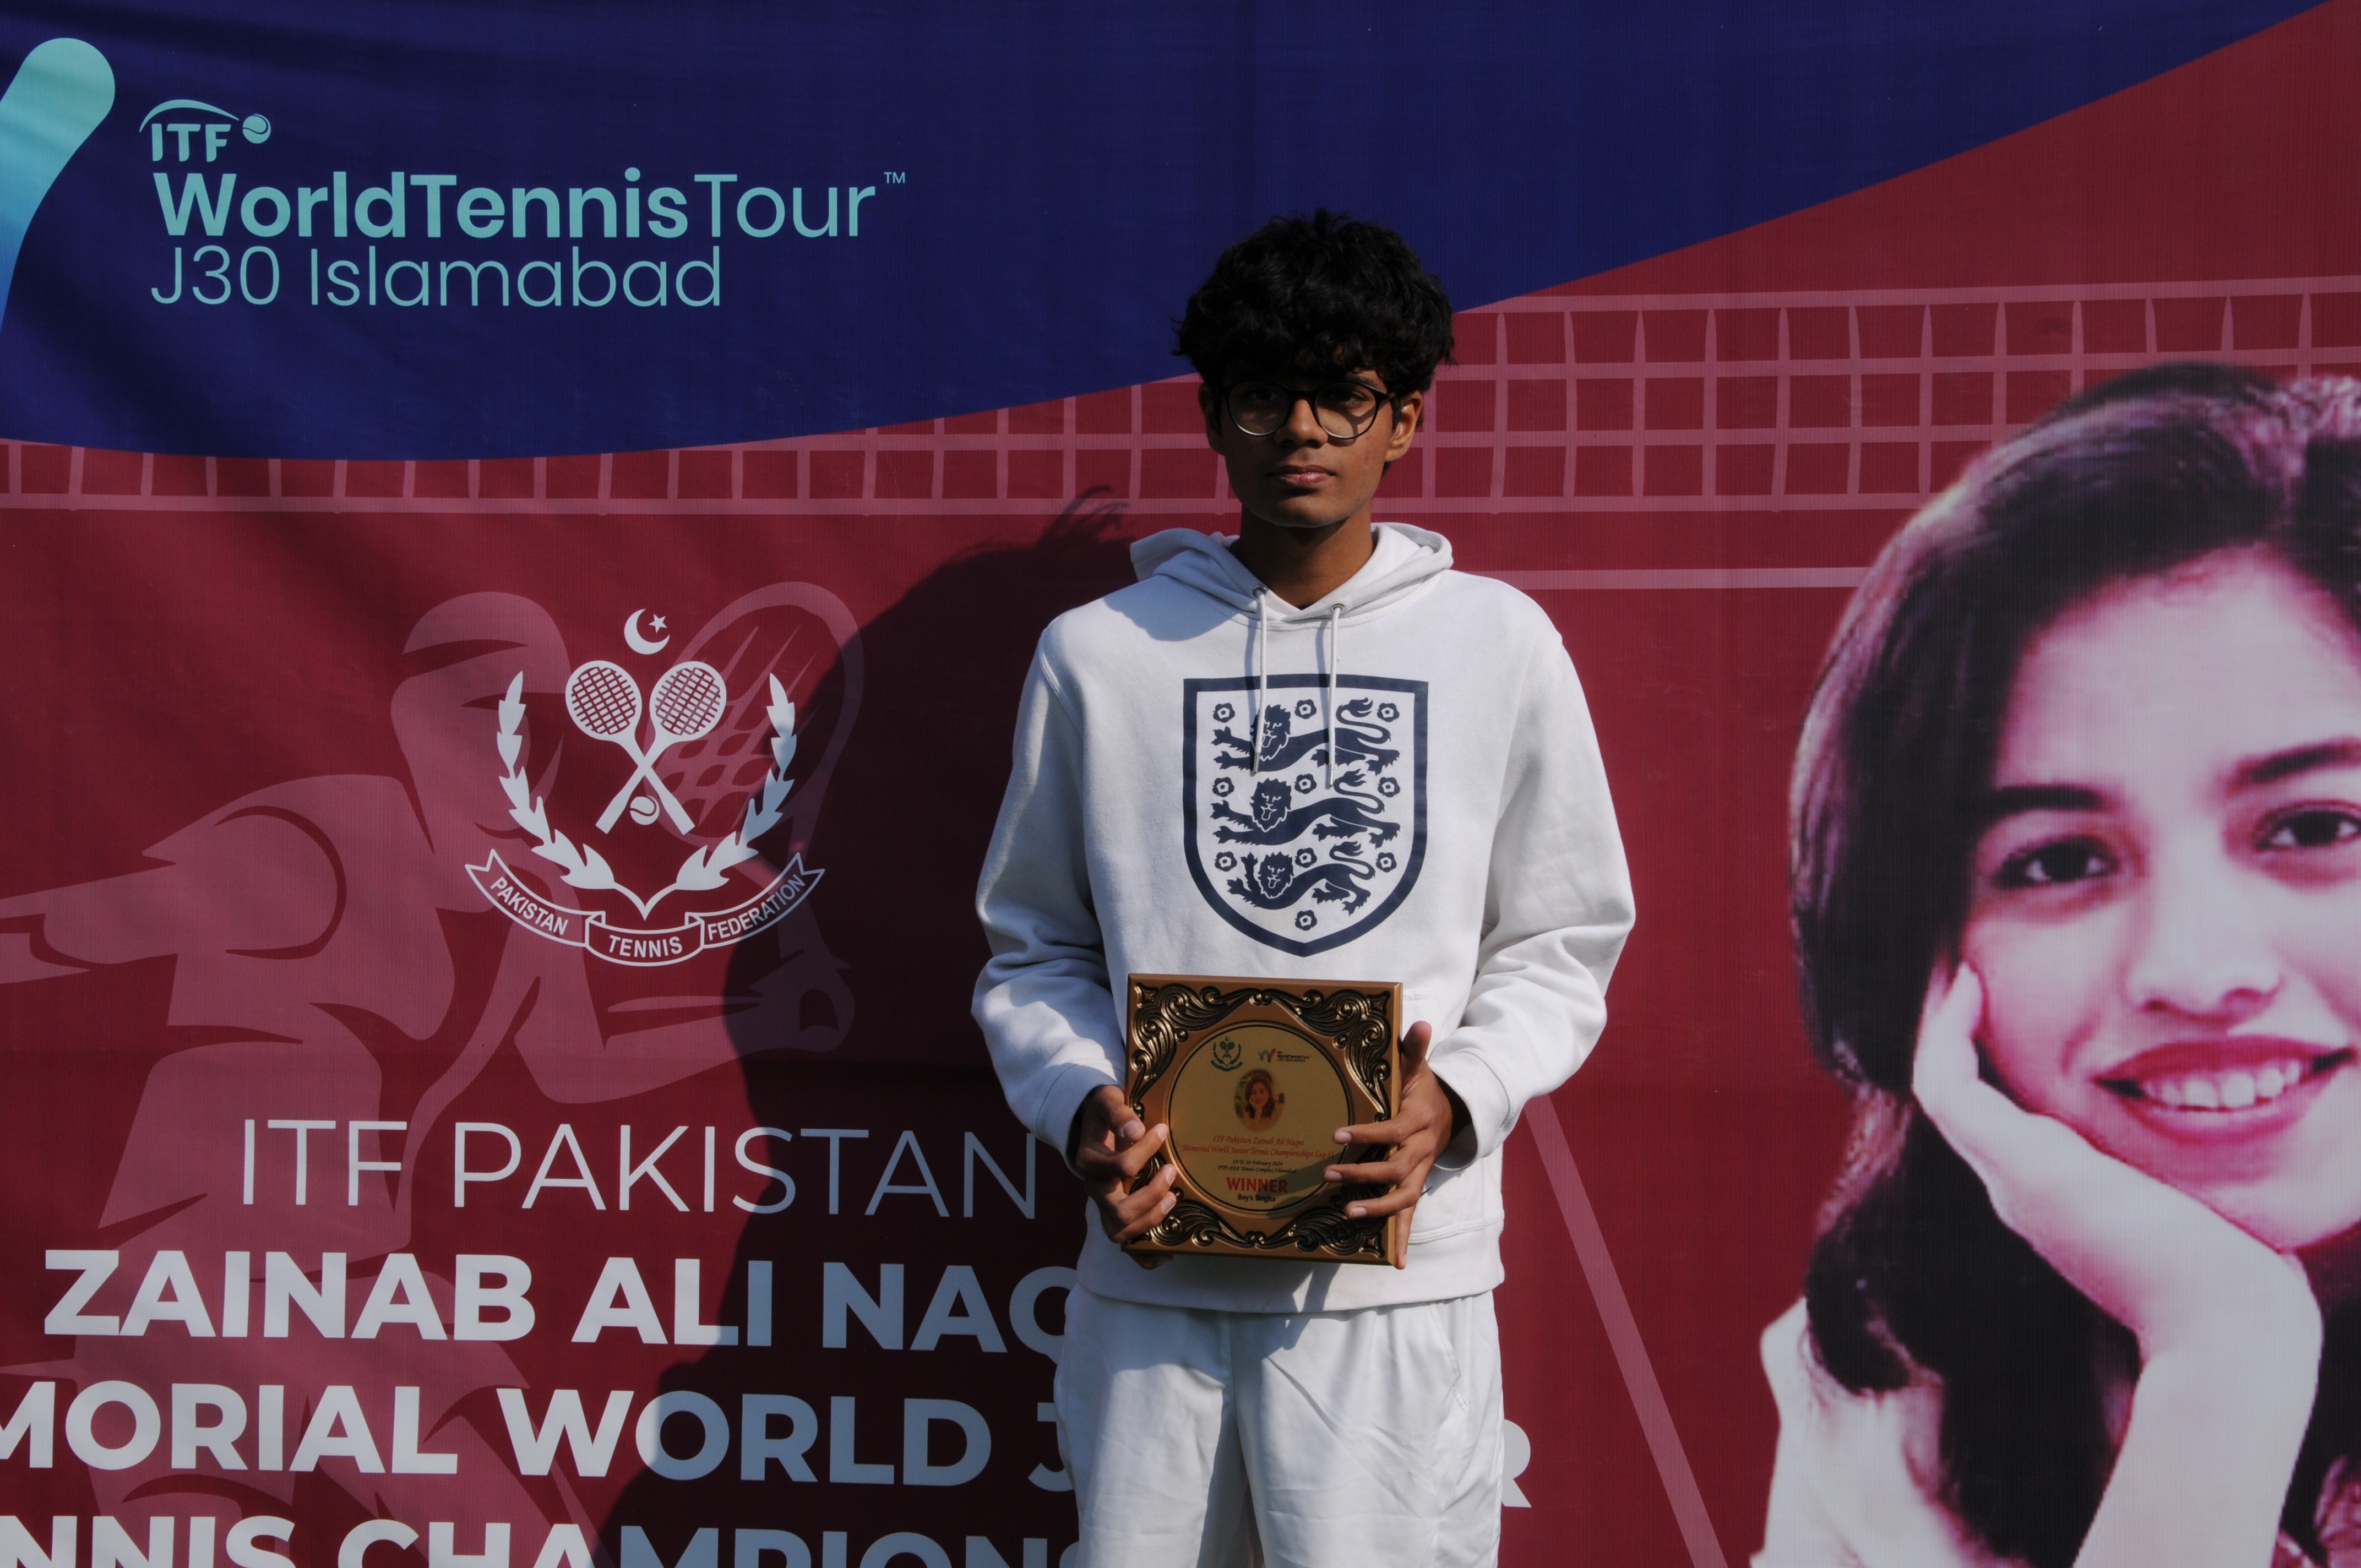 A winning tennis player posing with his trophy